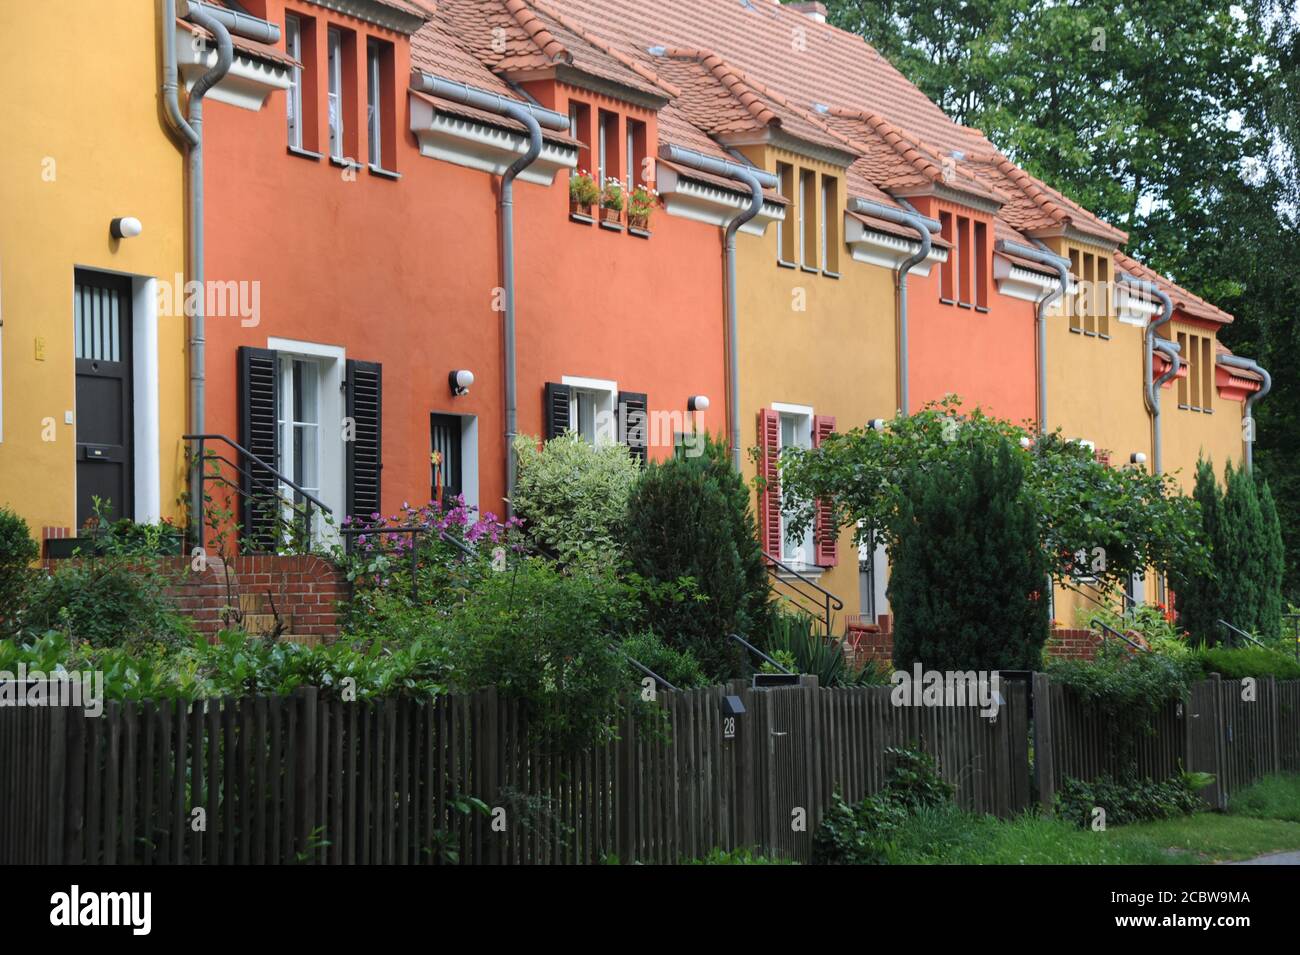 Germany, Berlin. The artfully painted houses of Garden City Falkenberg from 1912 became a UNESCO world heritage site in 2008 Stock Photo